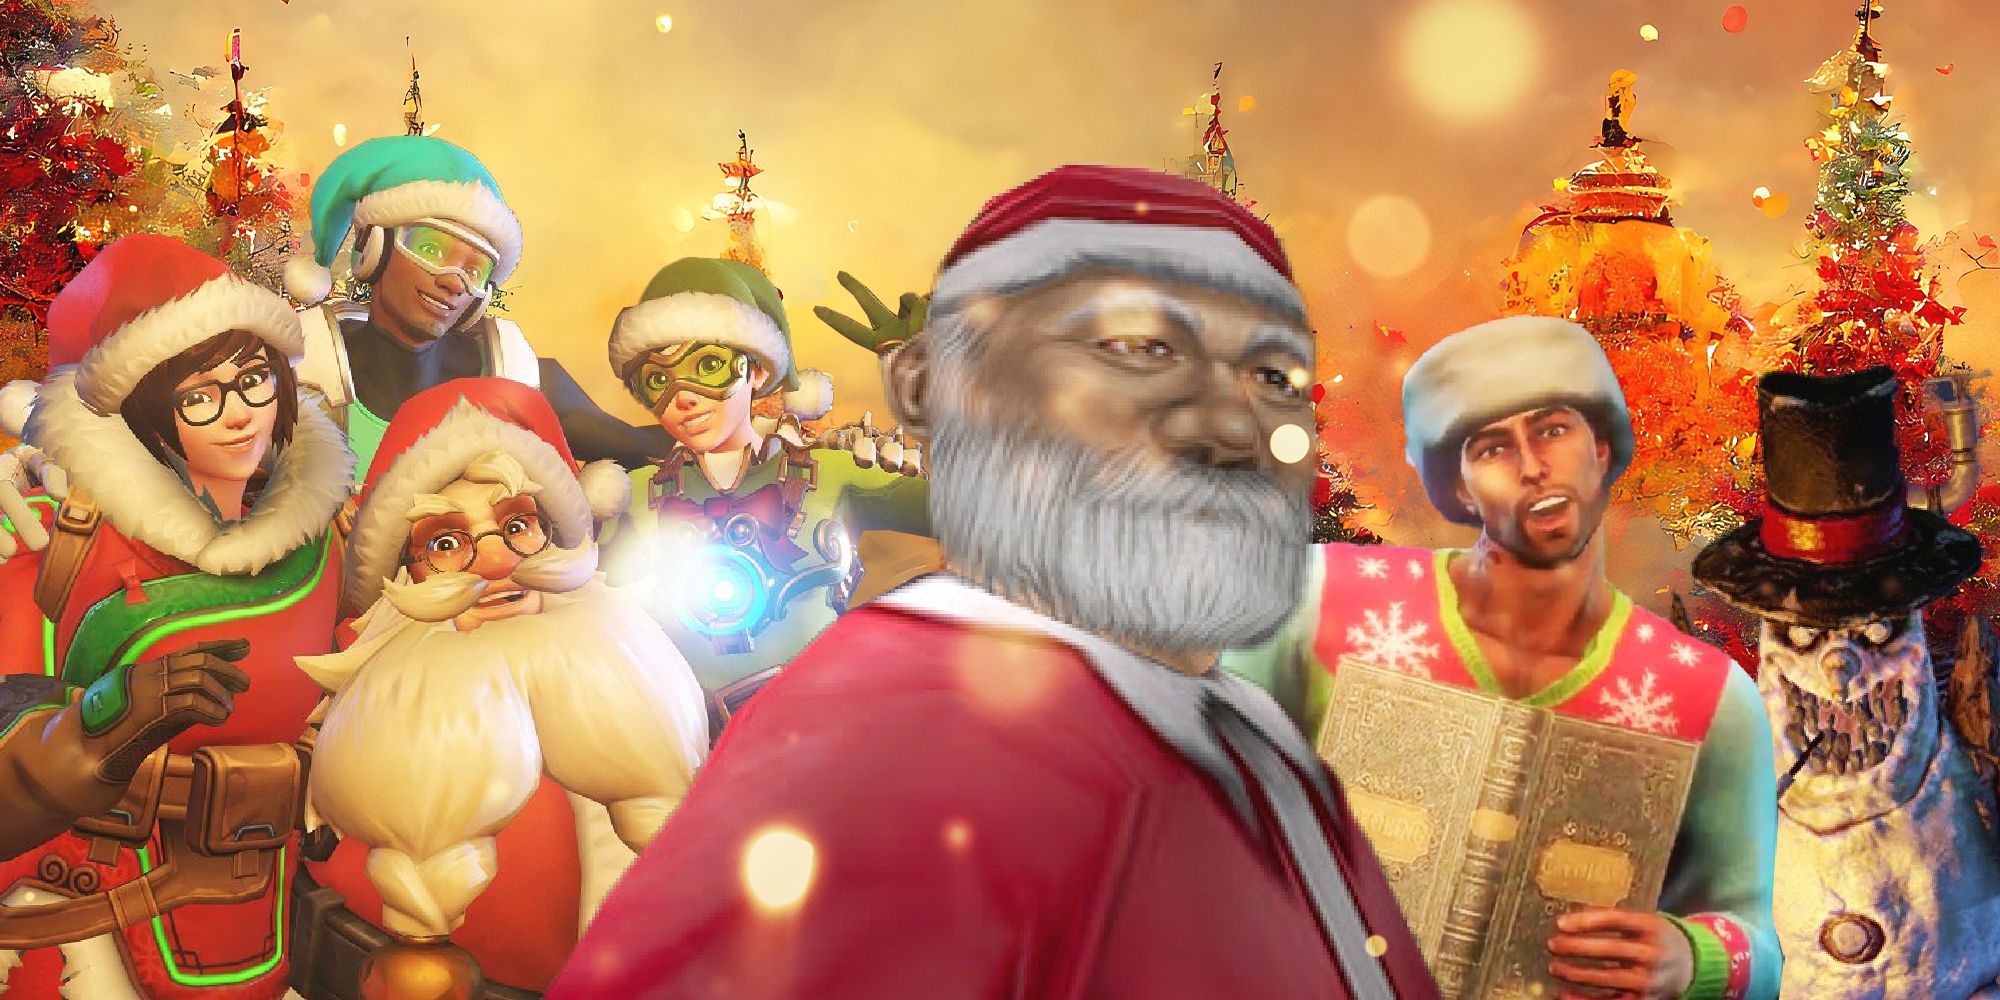 Overwatch Shenmue Saints Row and Killing Floor 2 characters dressed up for Christmas